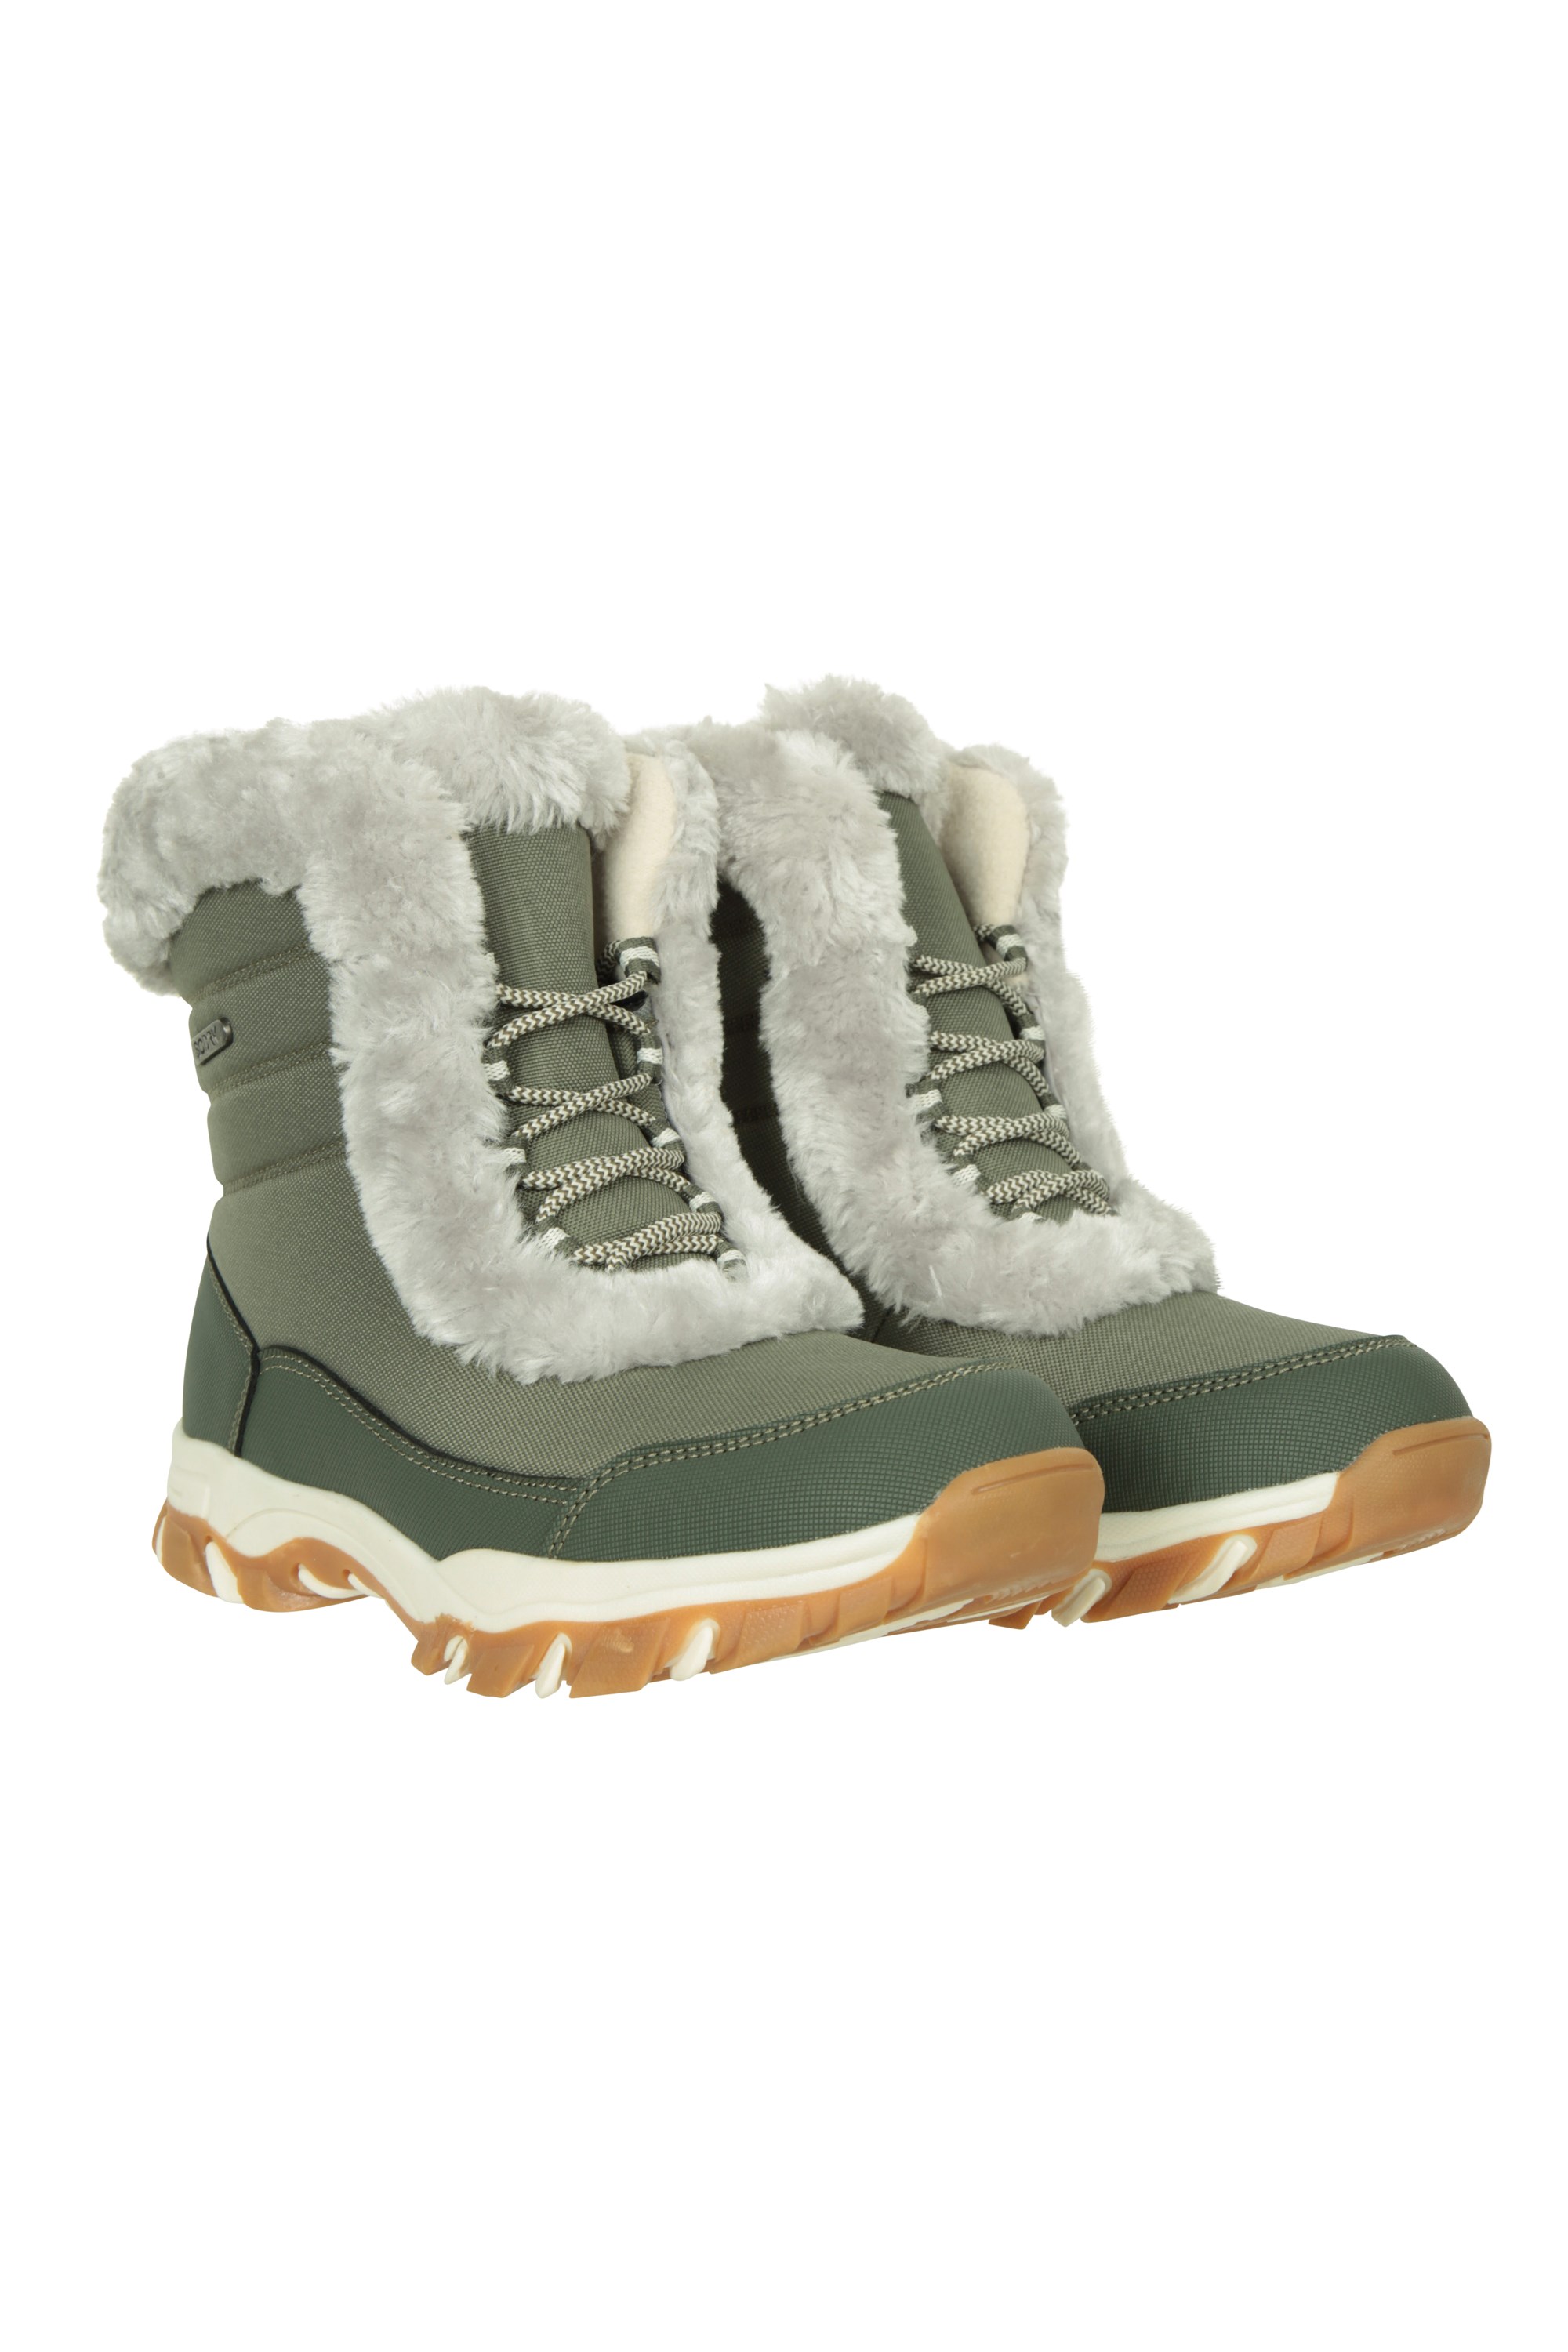 Ohio Short Womens Thermal Snow Boots - Green